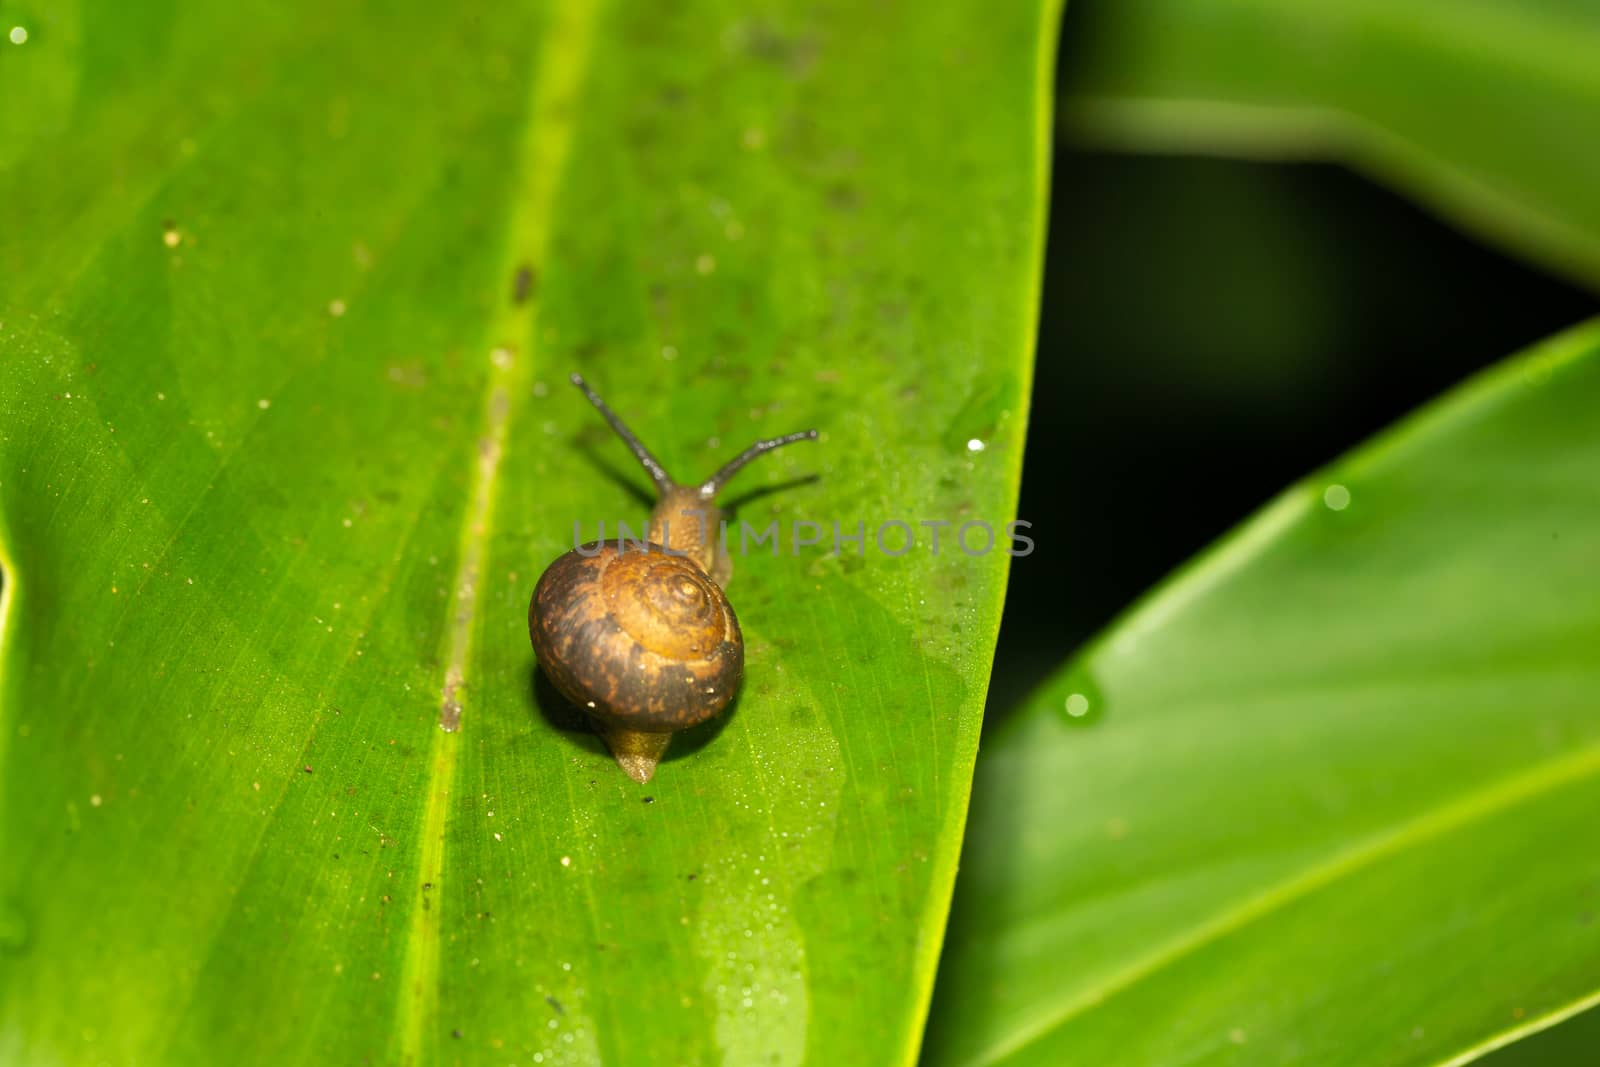 One small snail with its snail shell on a green leaf